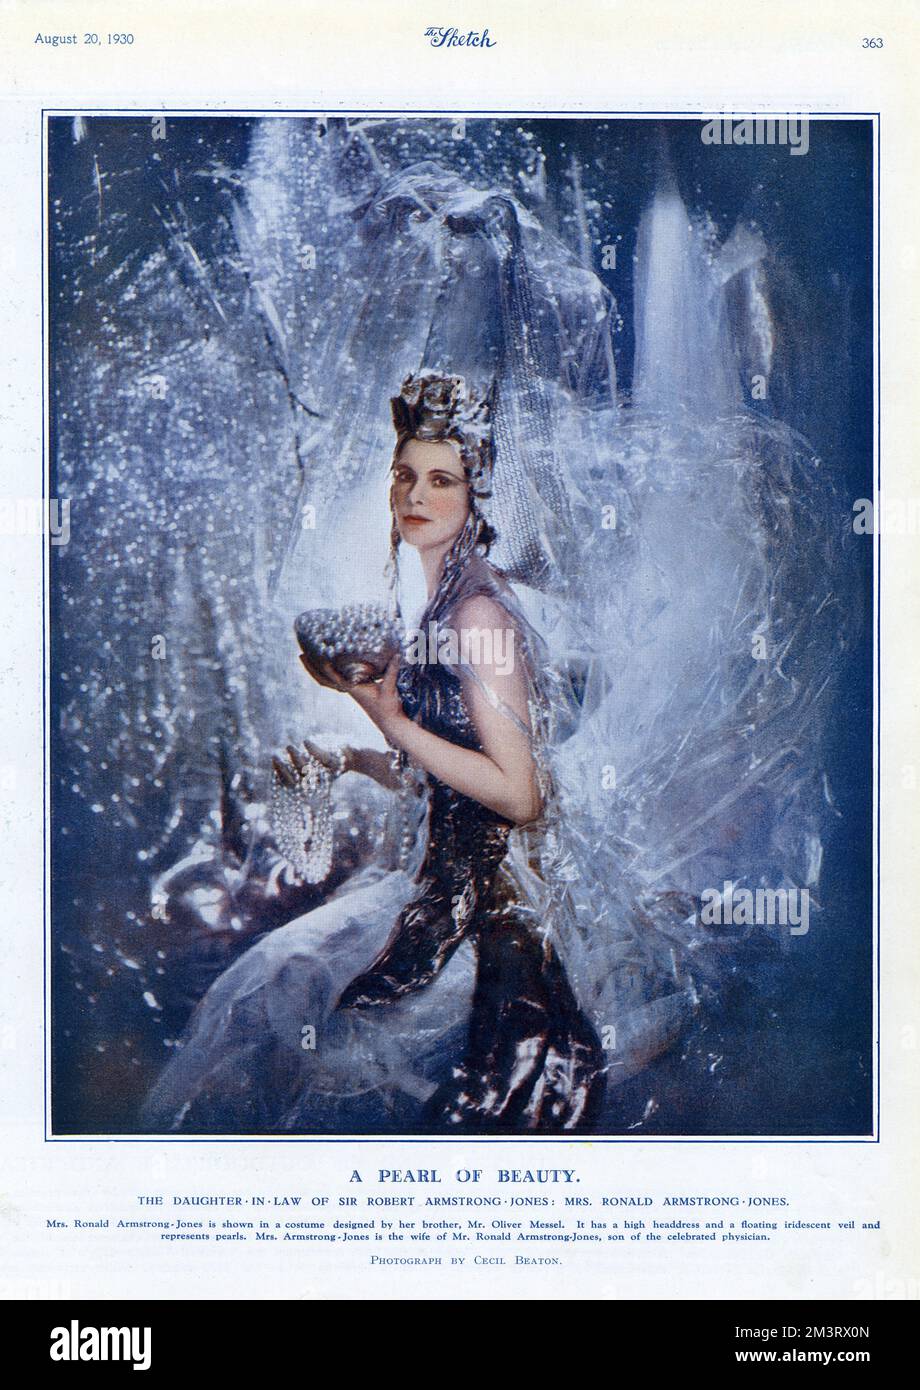 Mrs. Ronald Armstrong-Jones, photographed by Cecil Beaton in a costume designed by her brother, Oliver Messel.  Anne Messel (later Parsons) was previously married to Ronald Armstrong-Jones, with whom she had a daughter and a son, before she married Michael Parsons, 6th Earl of Rosse on 19 September 1935. The couple had two sons. Her eldest son Antony Armstrong-Jones, Earl of Snowdon (from her previous marriage with Ronald Armstrong-Jones) married Princess Margaret.      Date: 1930 Stock Photo